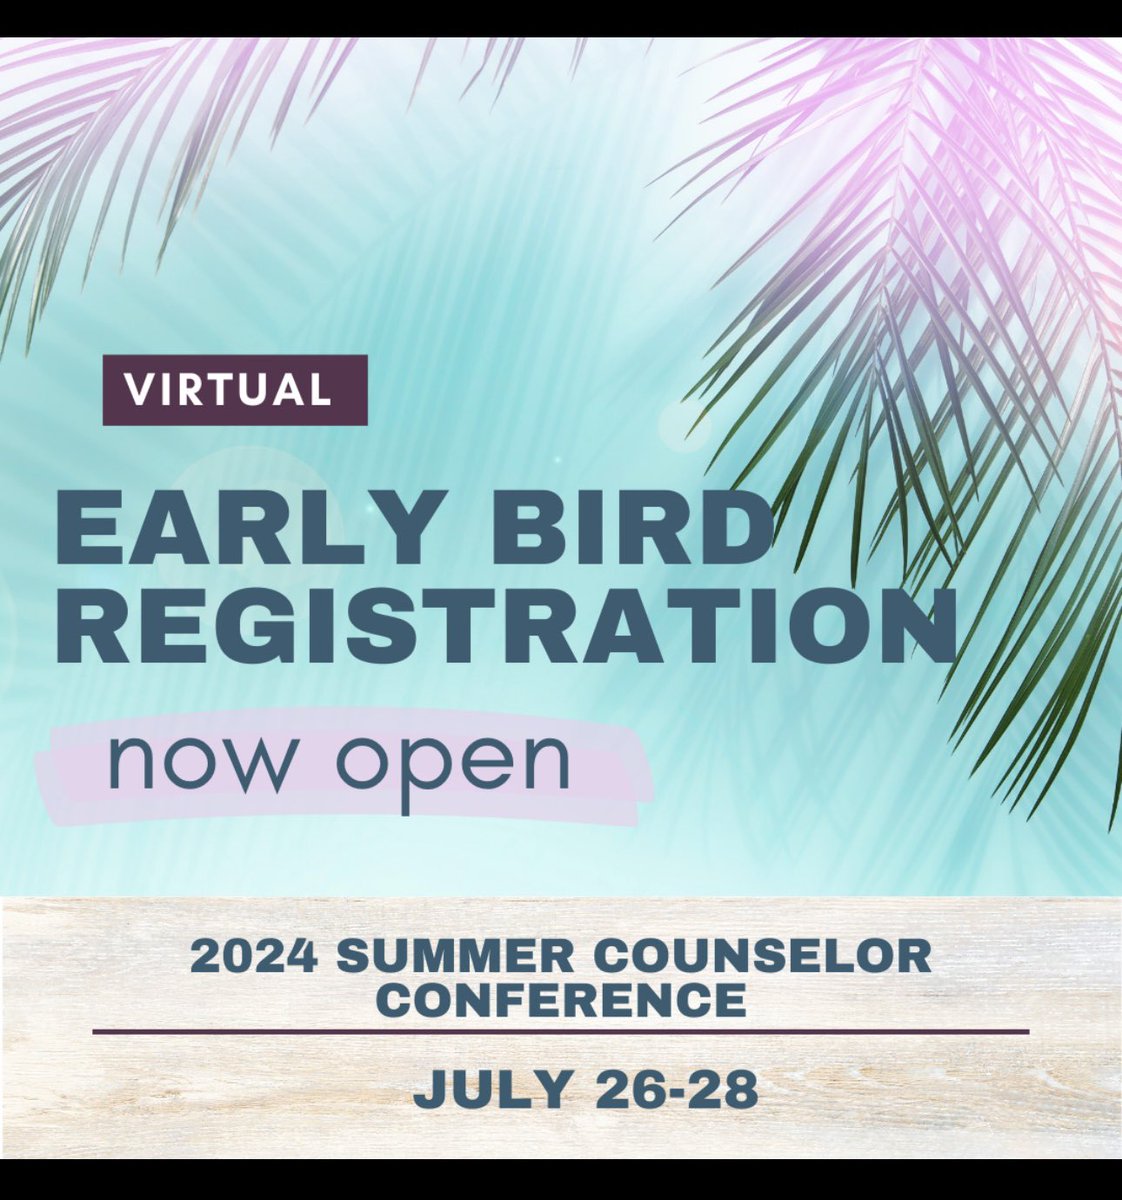 💻Registration is open for the Summer Counselor Conference! It’s online, so grab a ticket and check it out! ⬇️I’m presenting: ❤️Nurturing Resilience: Strategies for Supporting Middle School Mental Health Early Bird Tickets $49 by 6/15 ⬇️register here! …er-counseling-essentials.mykajabi.com/a/2147845963/G…